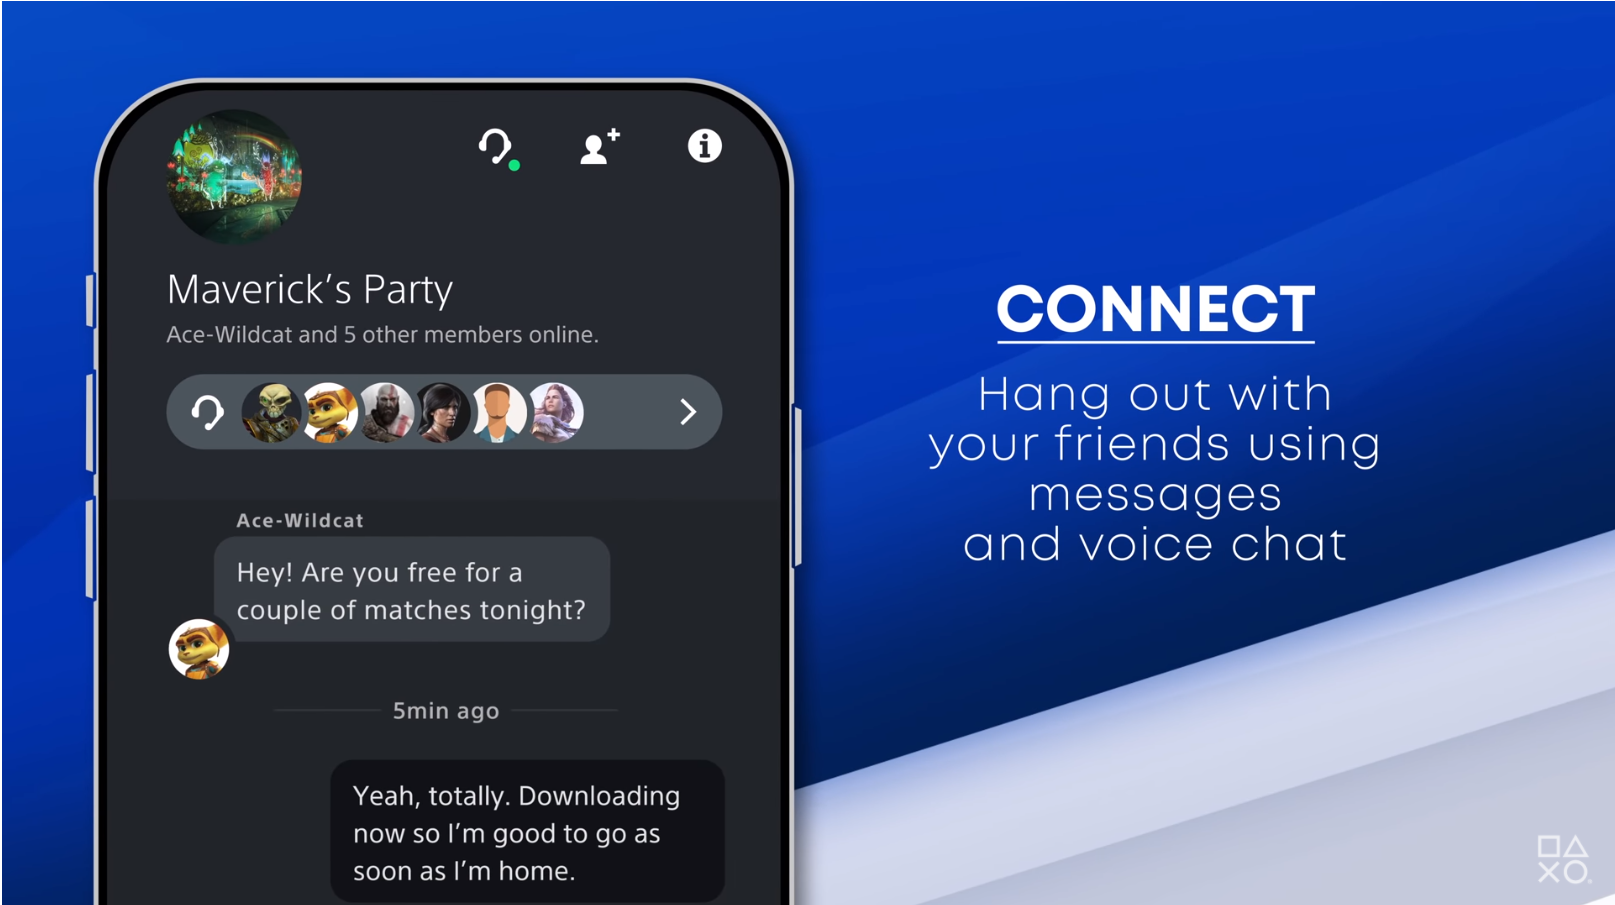 About: PlayStation Messages (iOS App Store version)